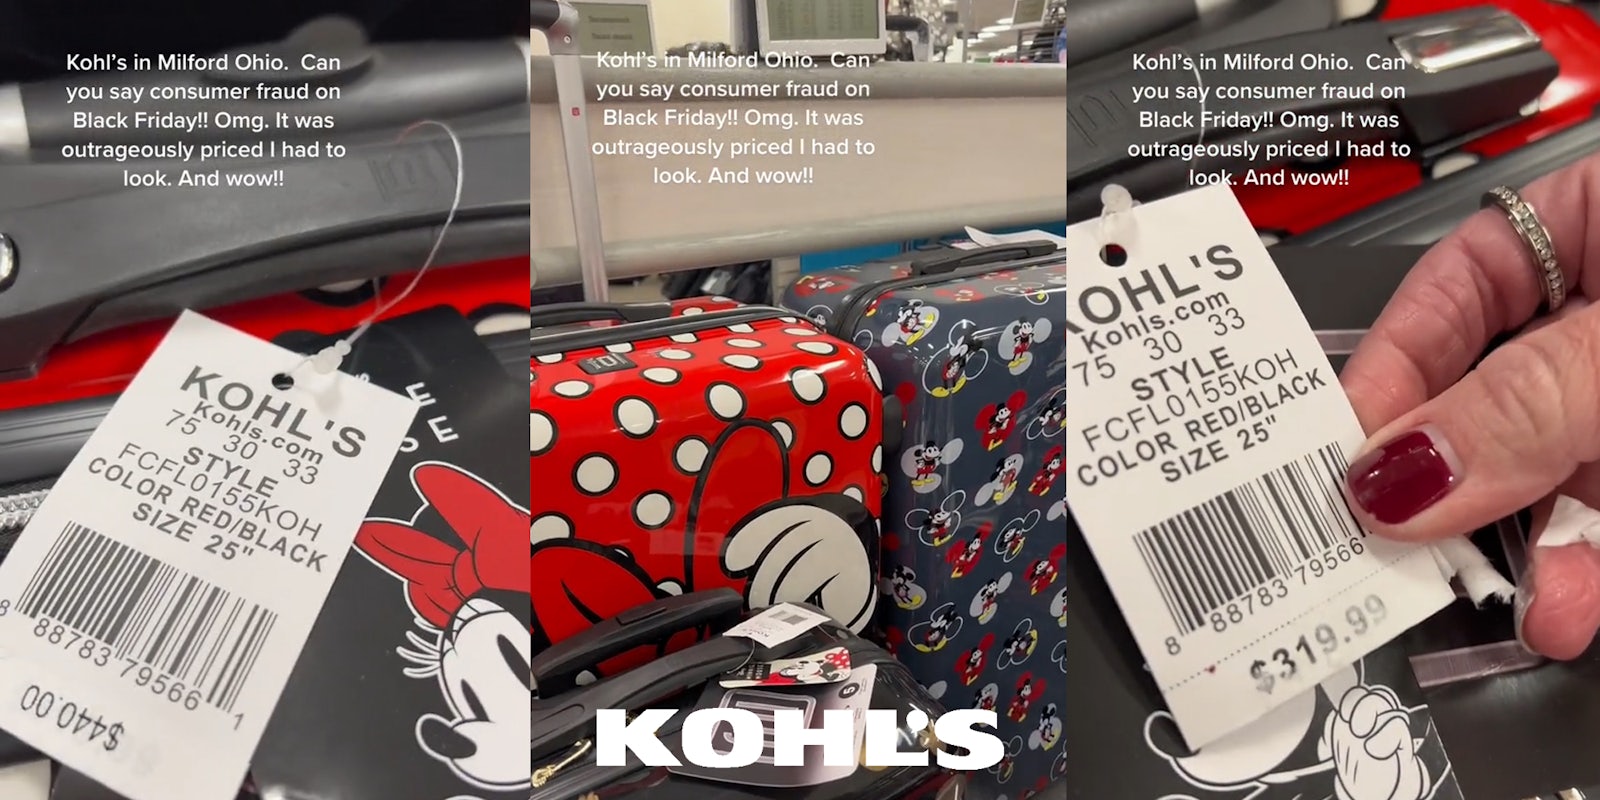 Minnie Mouse luggage bag at Kohl's priced at $440 caption 'Kohl's in Milford Ohio. Can you say consumer fraud on Black Friday!! Omg. It was outrageously priced I had to look. And wow!!' (l) Kohl's interior with Minnie Mouse luggage bags and Kohl's logo at bottom caption 'Kohl's in Milford Ohio. Can you say consumer fraud on Black Friday!! Omg. It was outrageously priced I had to look. And wow!!' (c) Kohl's Minnie Mouse luggage bag with original price at $319.99 caption 'Kohl's in Milford Ohio. Can you say consumer fraud on Black Friday!! Omg. It was outrageously priced I had to look. And wow!!' (r)